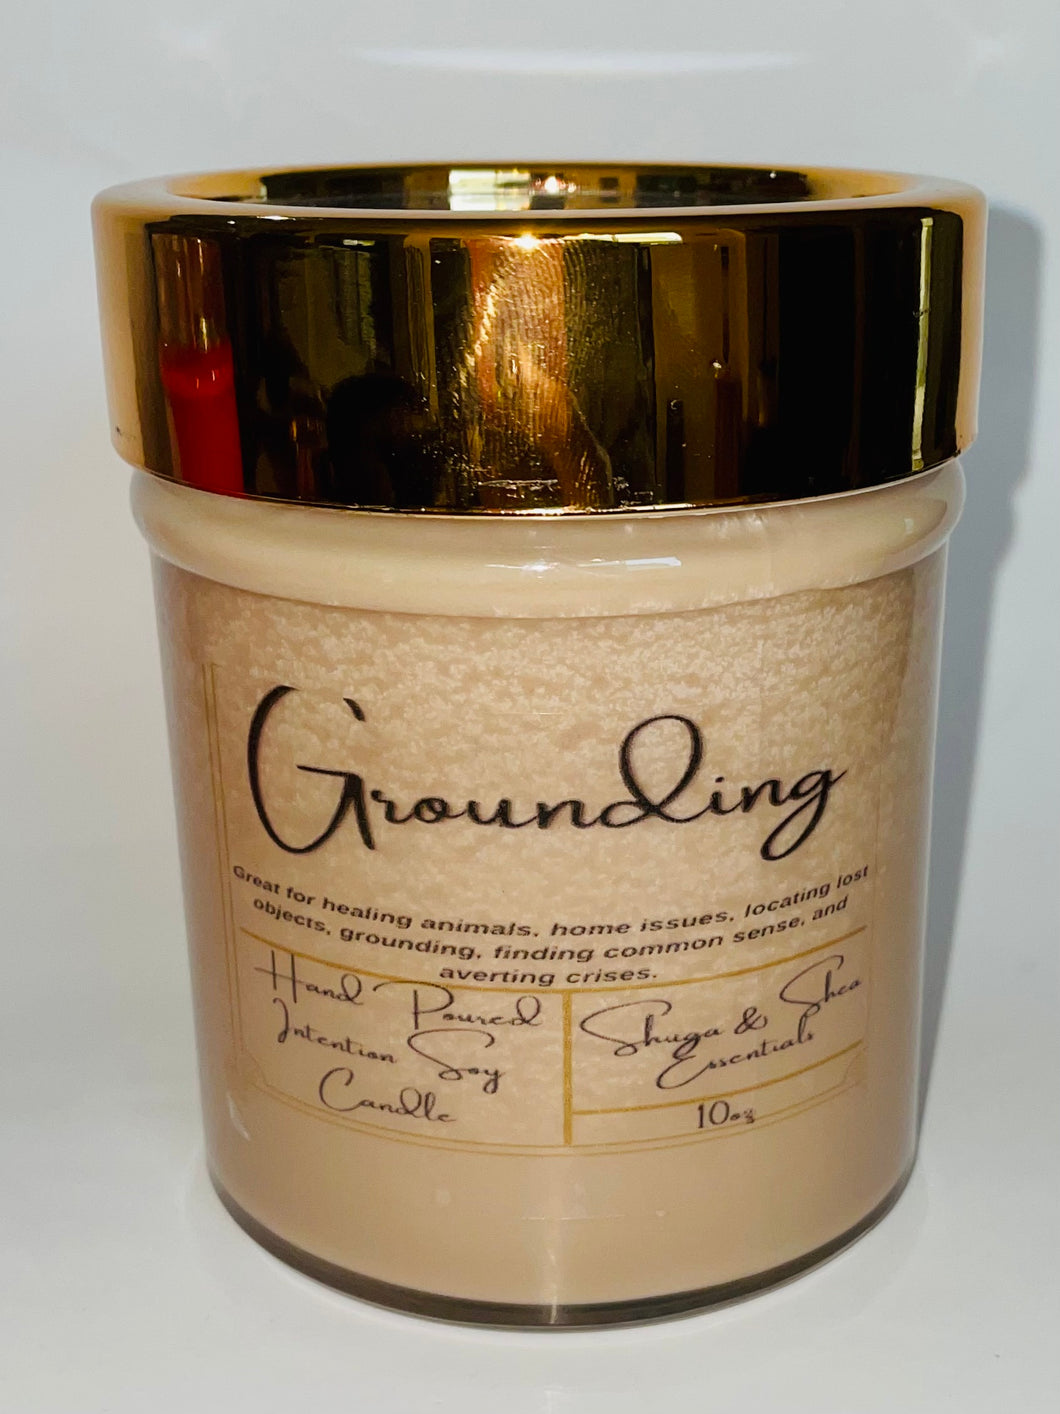 GROUNDING SOY CANDLE